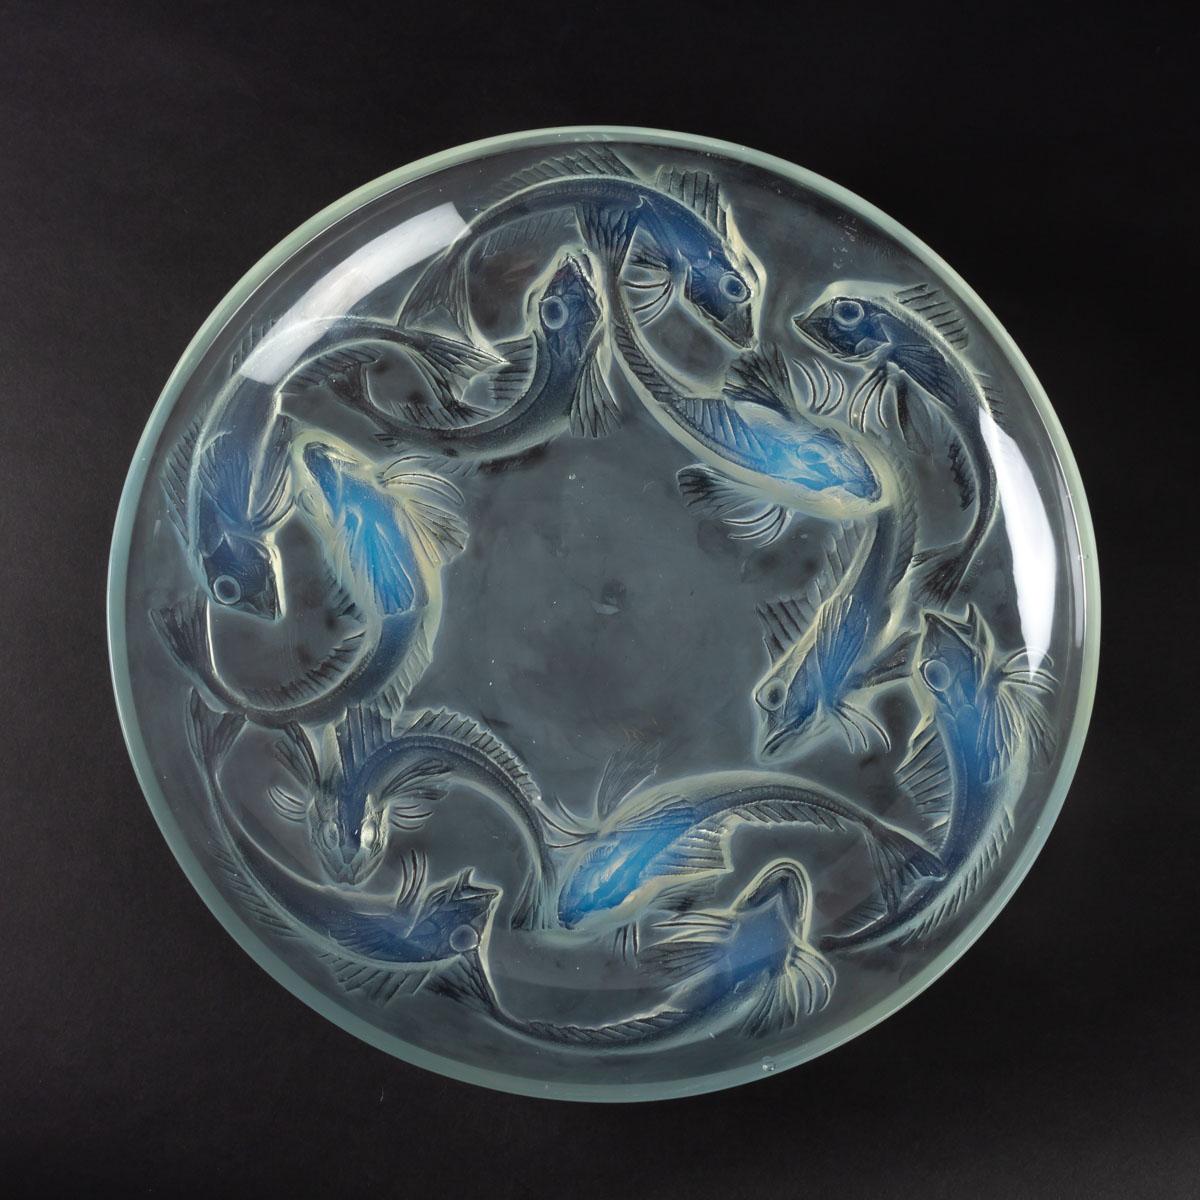 Early 20th Century 1920 René Lalique Martigues Coupe Bowl Opalescent Glass, Fishes